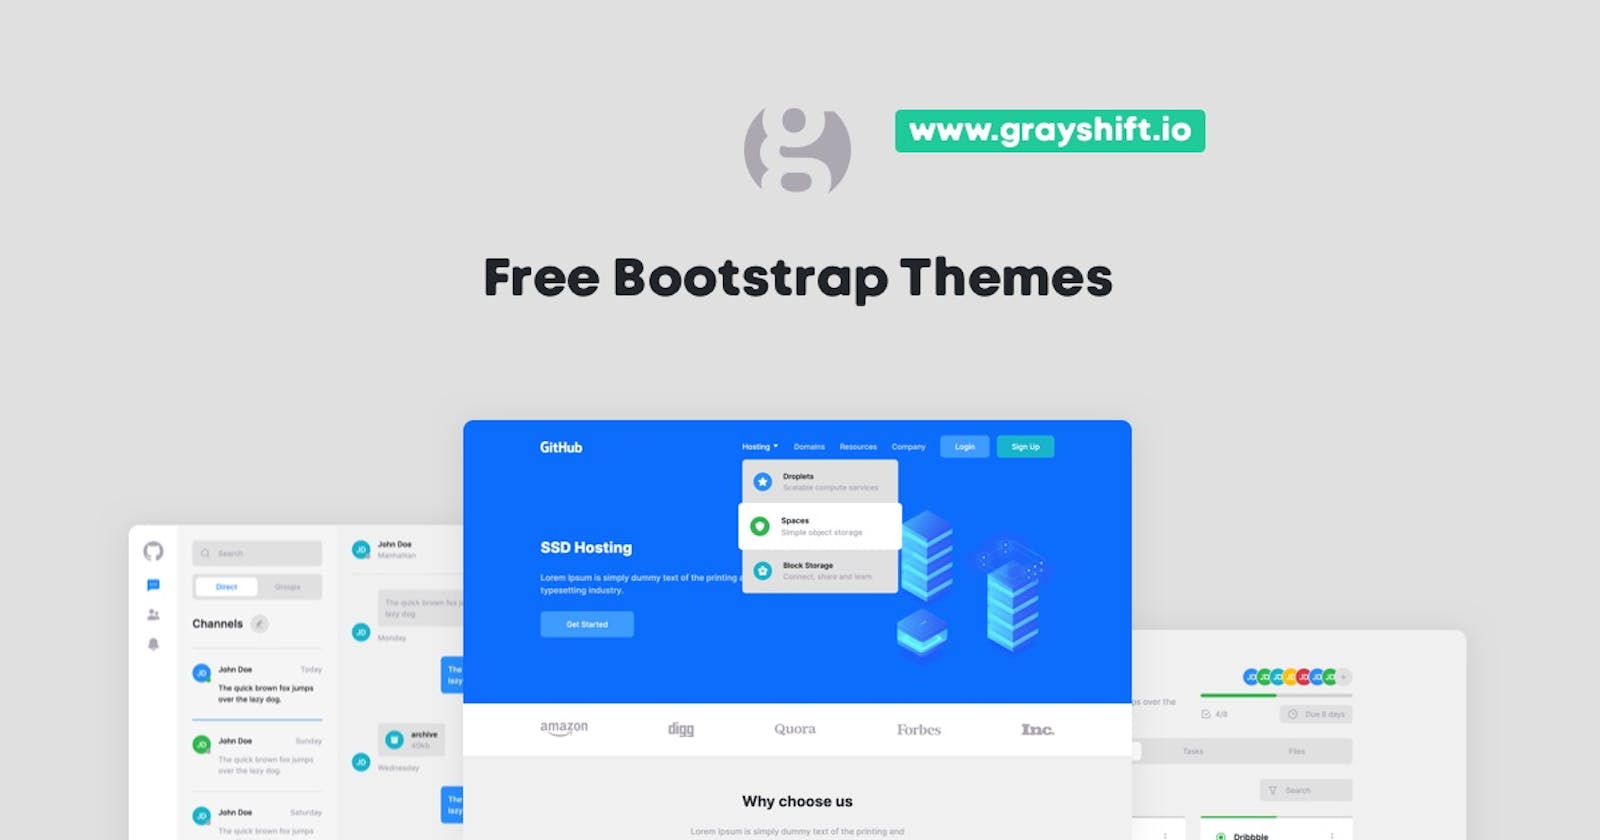 I designed some Free Bootstrap Themes